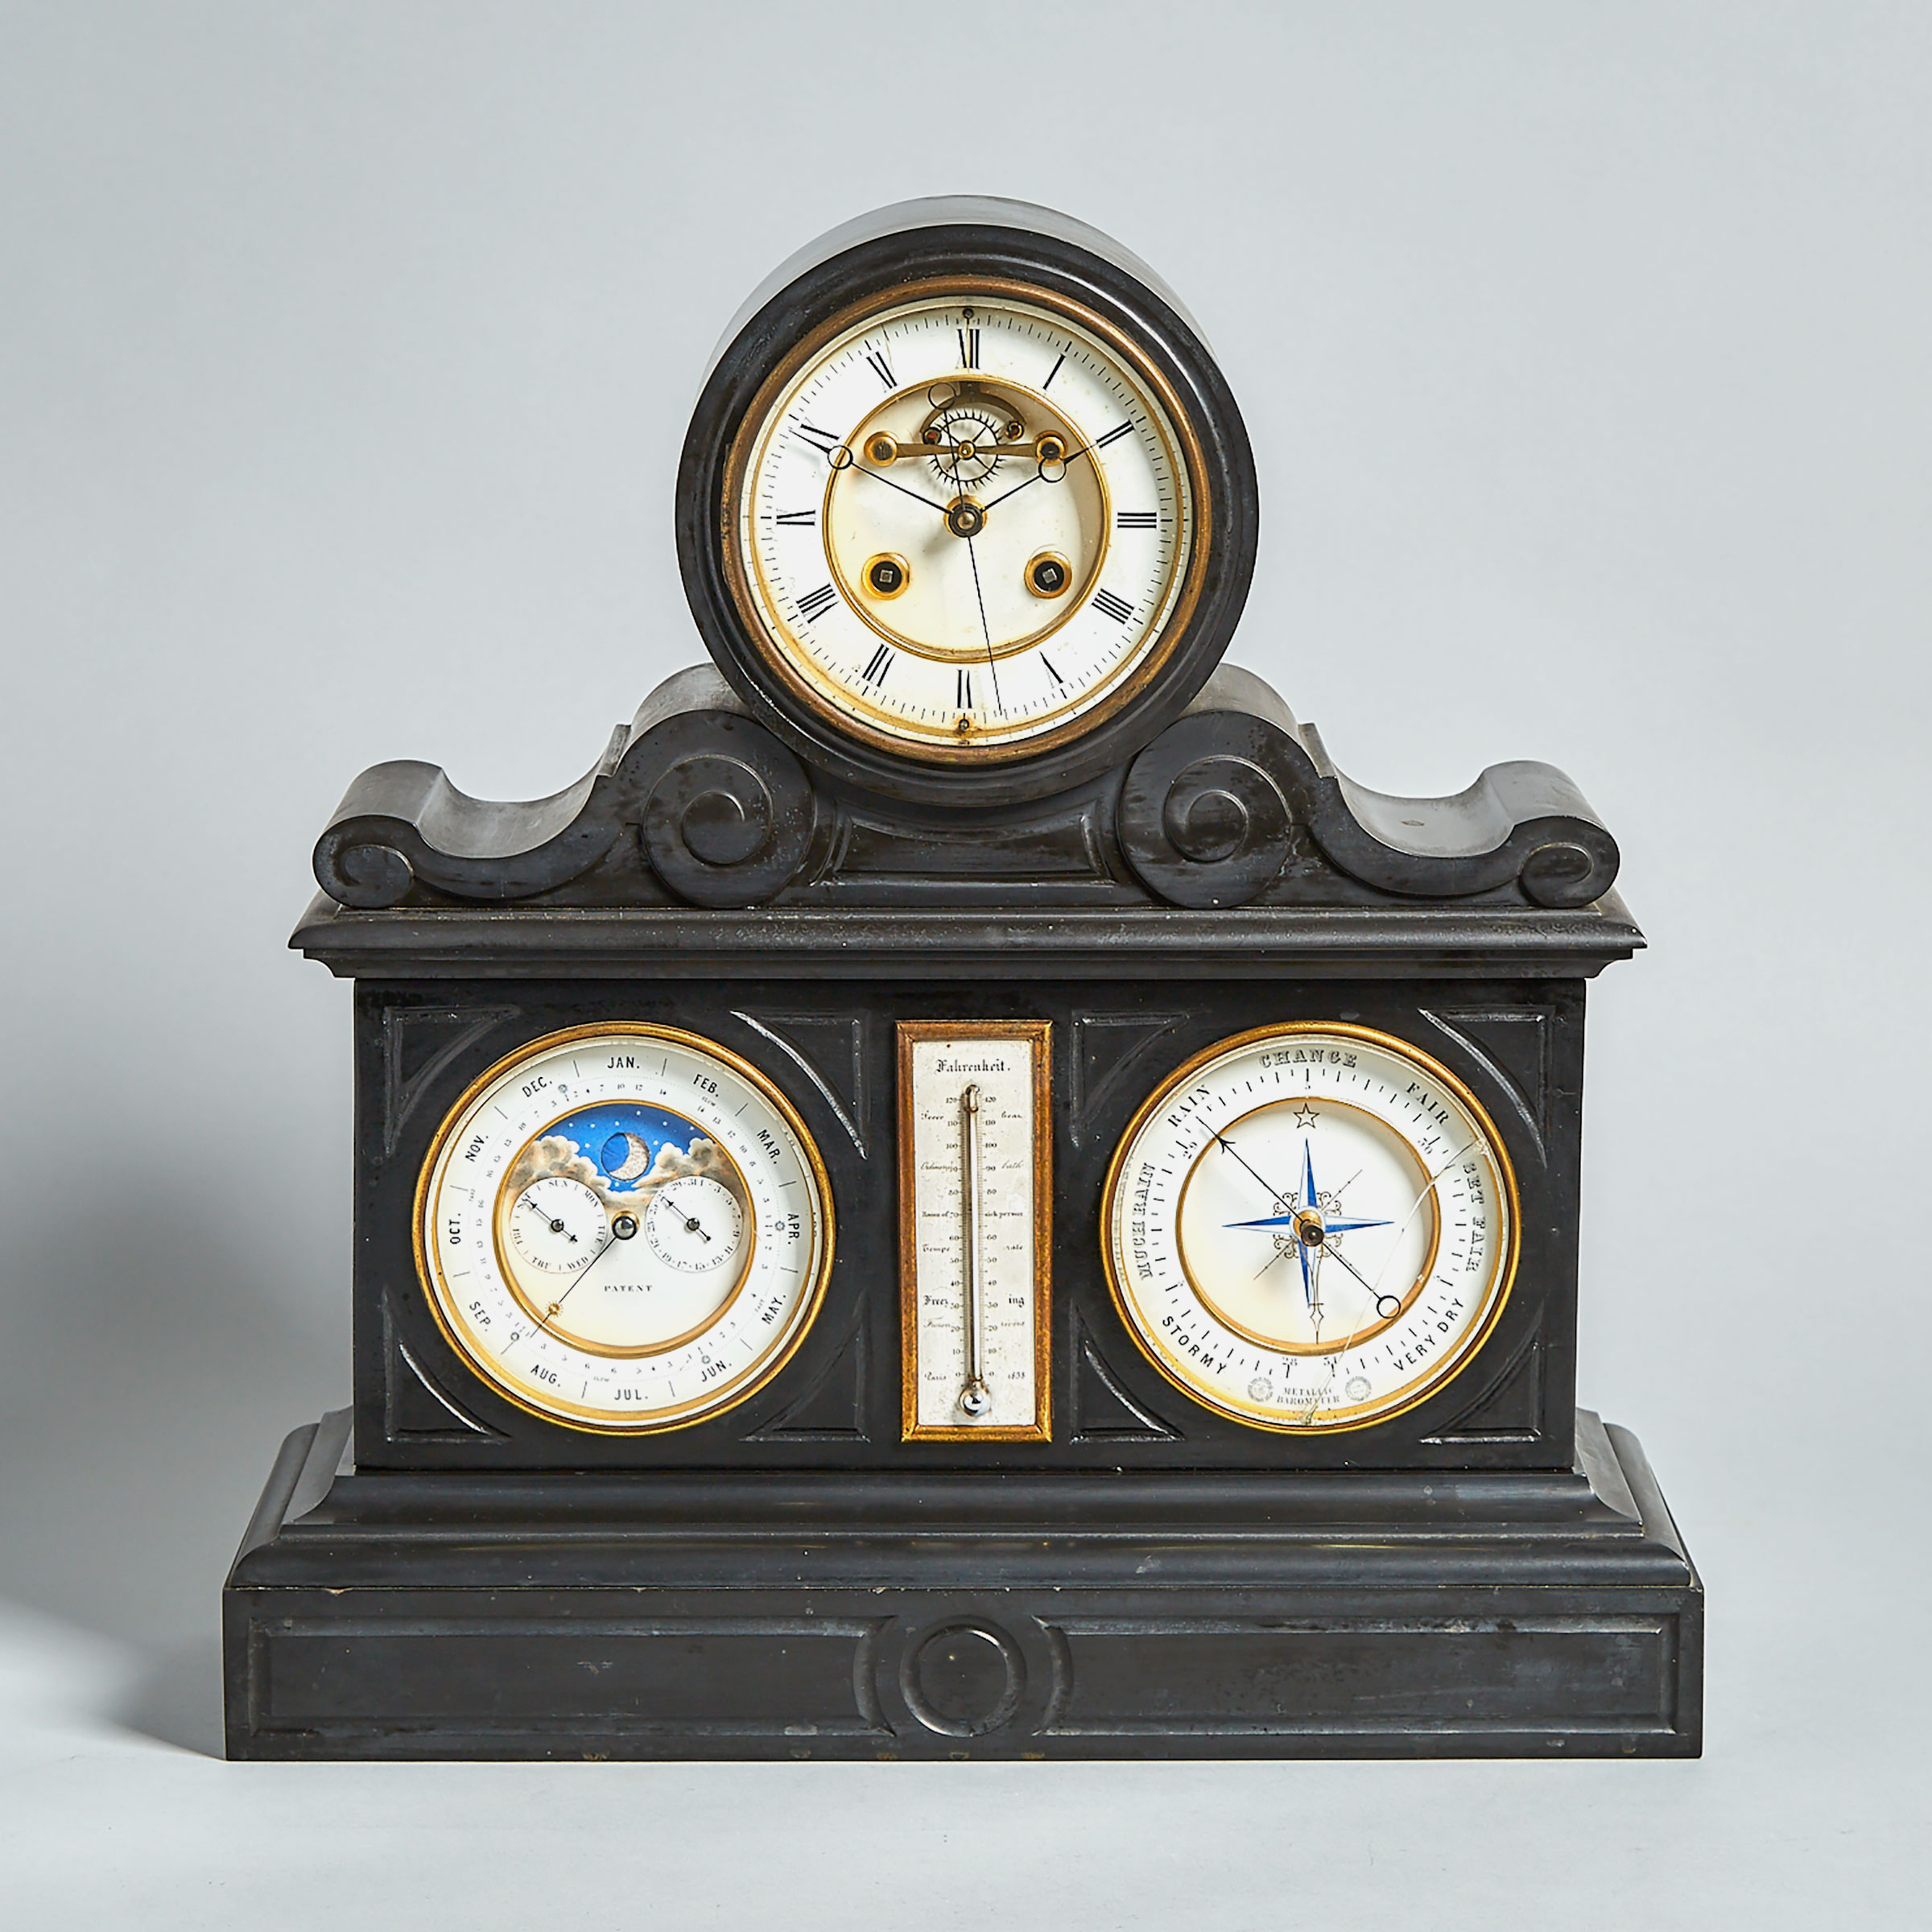 French Belgian Black Marble Mantle Clock with Moon Phases, Equation of Time, Perpetual Calendar, Barometer and Thermometer, c.1880